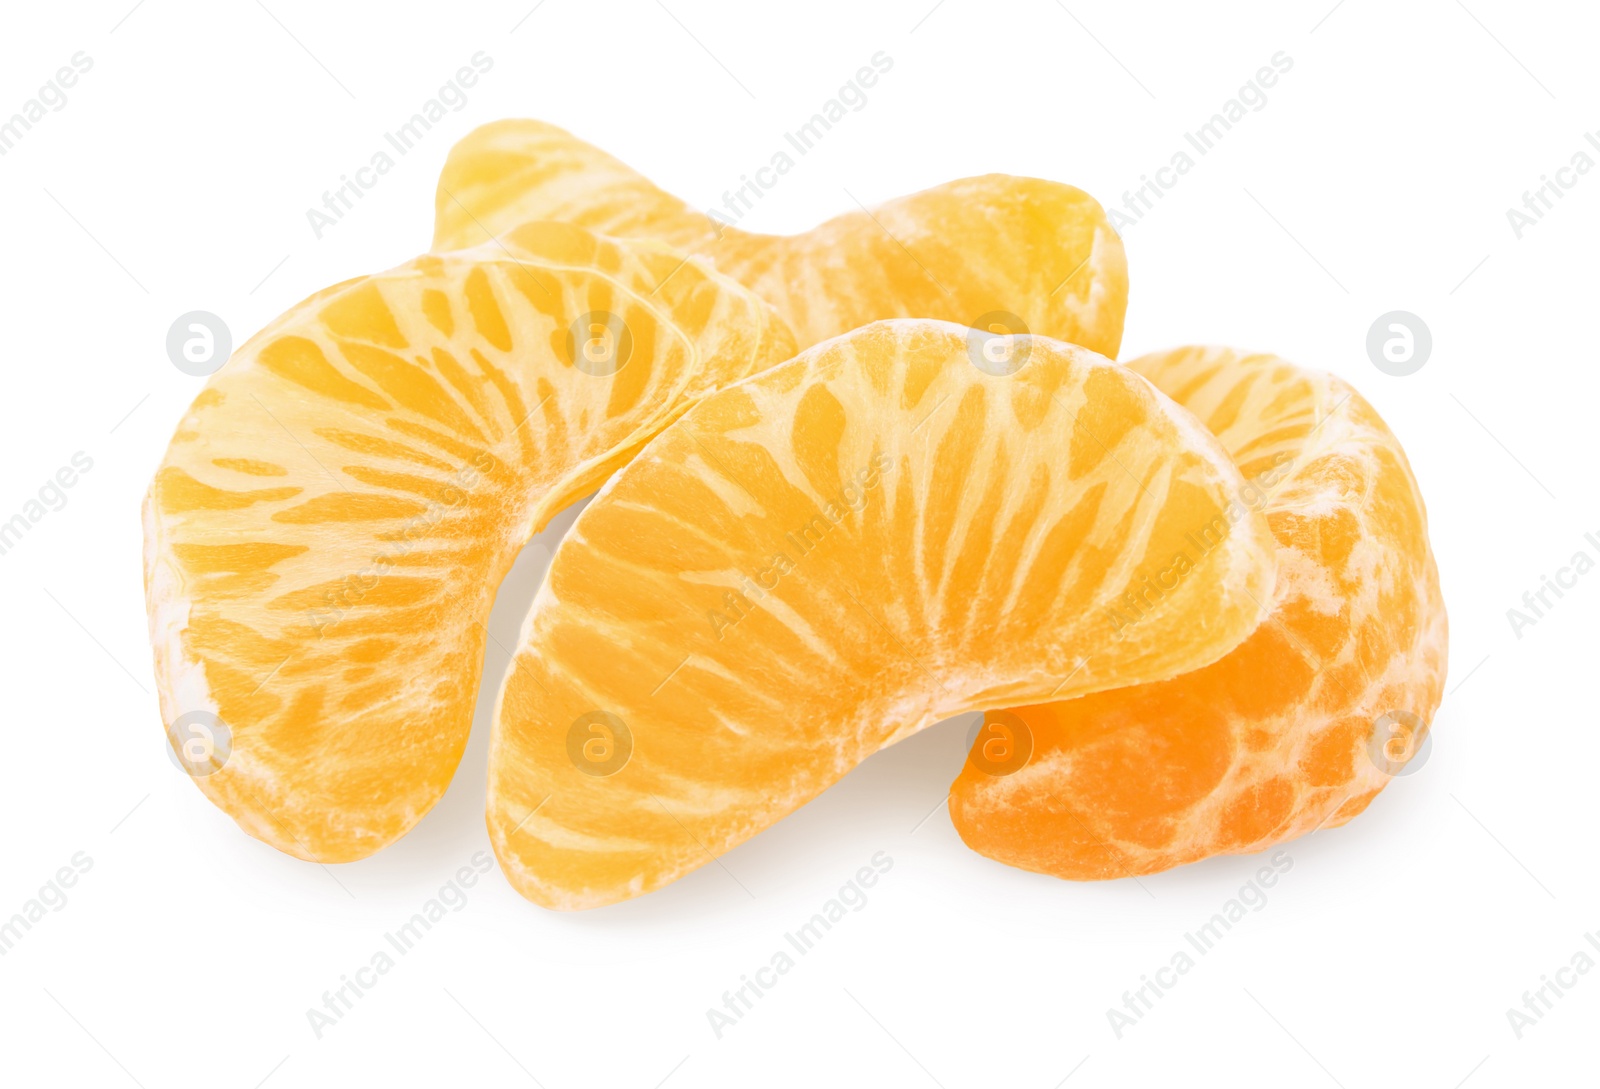 Photo of Pieces of fresh juicy tangerine on white background